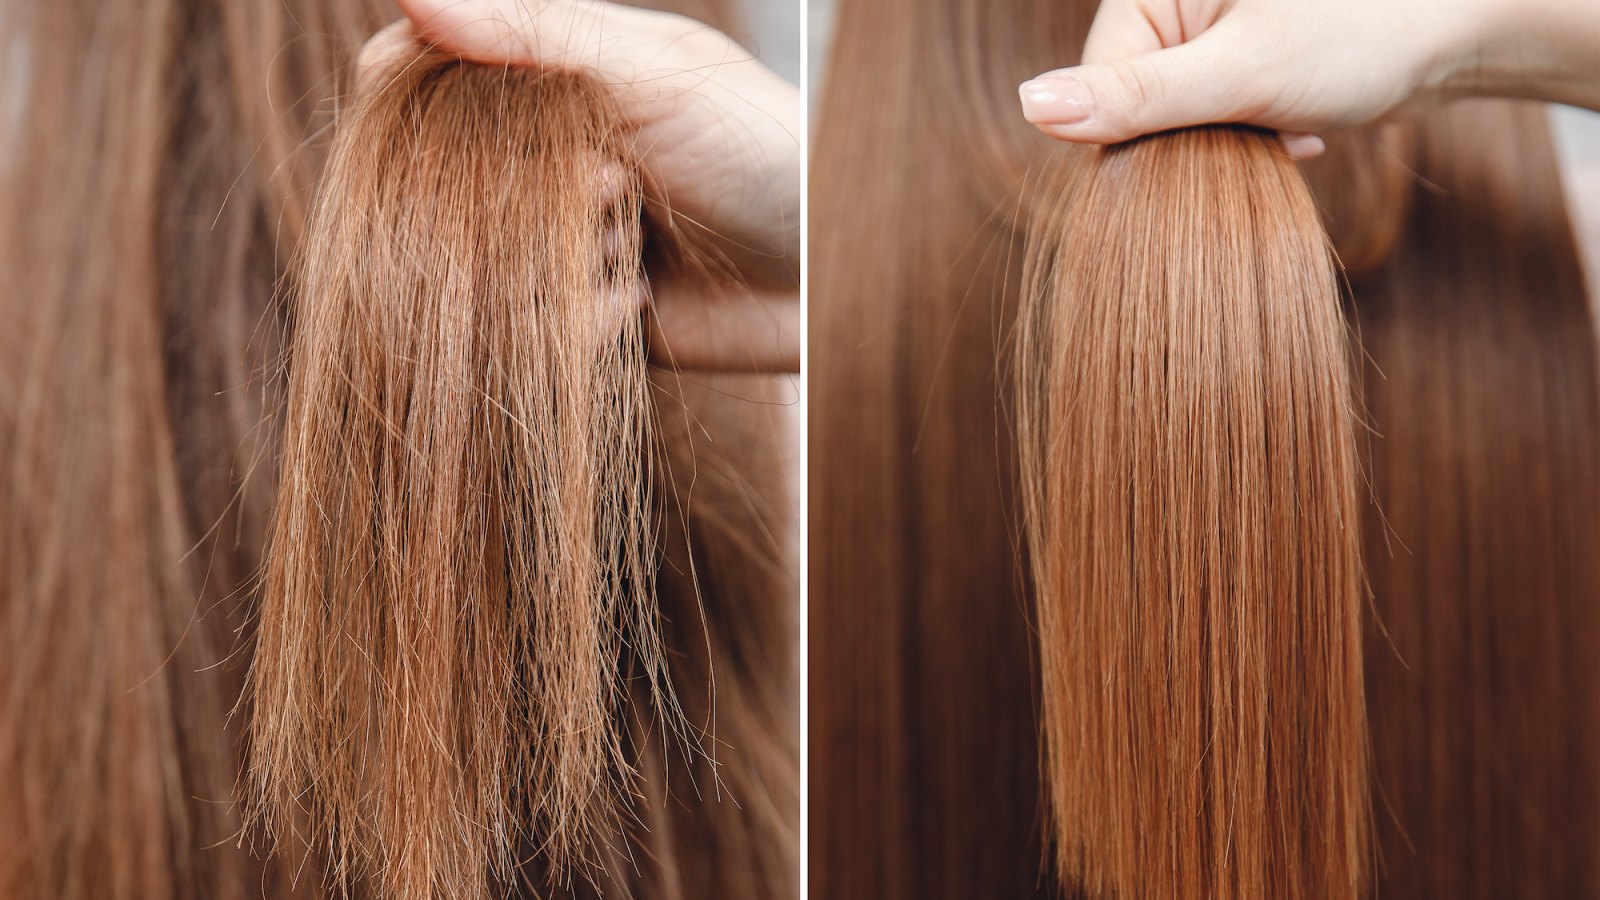 Opalex Hair Treatment Is a Game-Changer if You Dye Your Hair